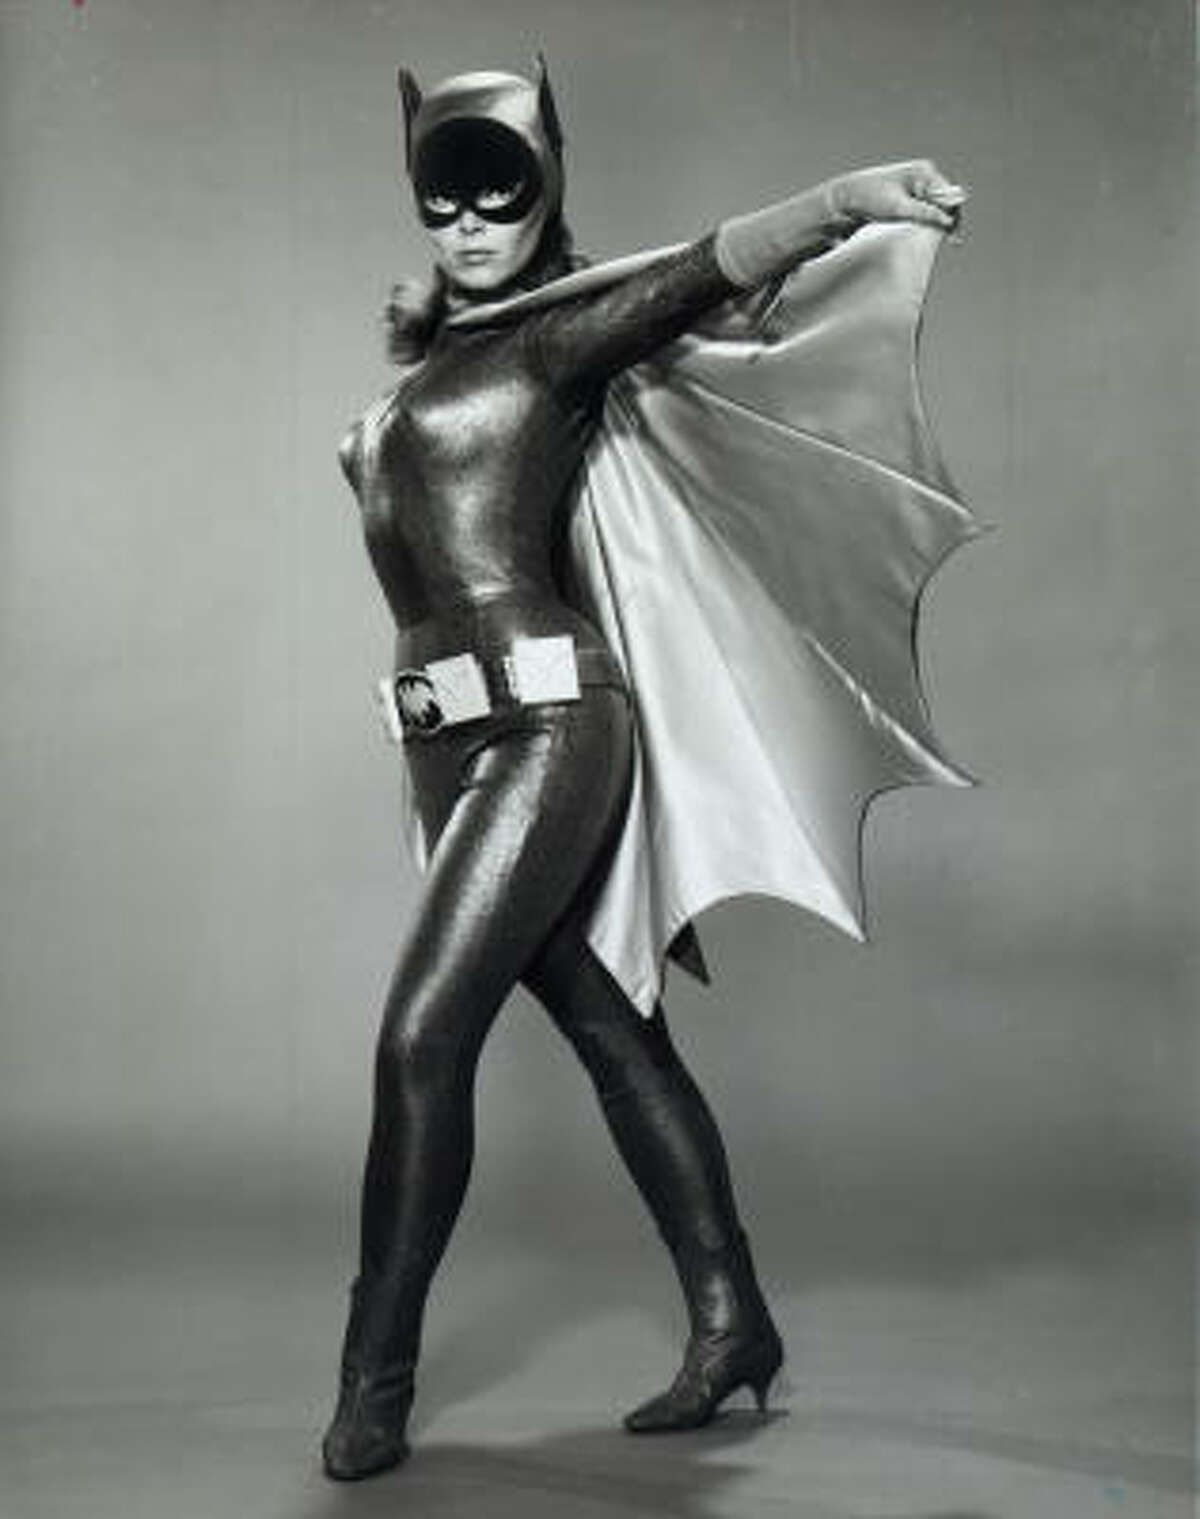 Yvonne Craig portrayed Batgirl in the TV version of Batman in the '60s. She was many a kid's first crush it seems, and when her death was announced this week it brought back a lot of memories for some.  We collected the first celeb crushes that readers shared, from the totally expected (Raquel Welch and Brad Pitt) to the unique and geeky (The Bride of Frankenstein and Alan Alda). 